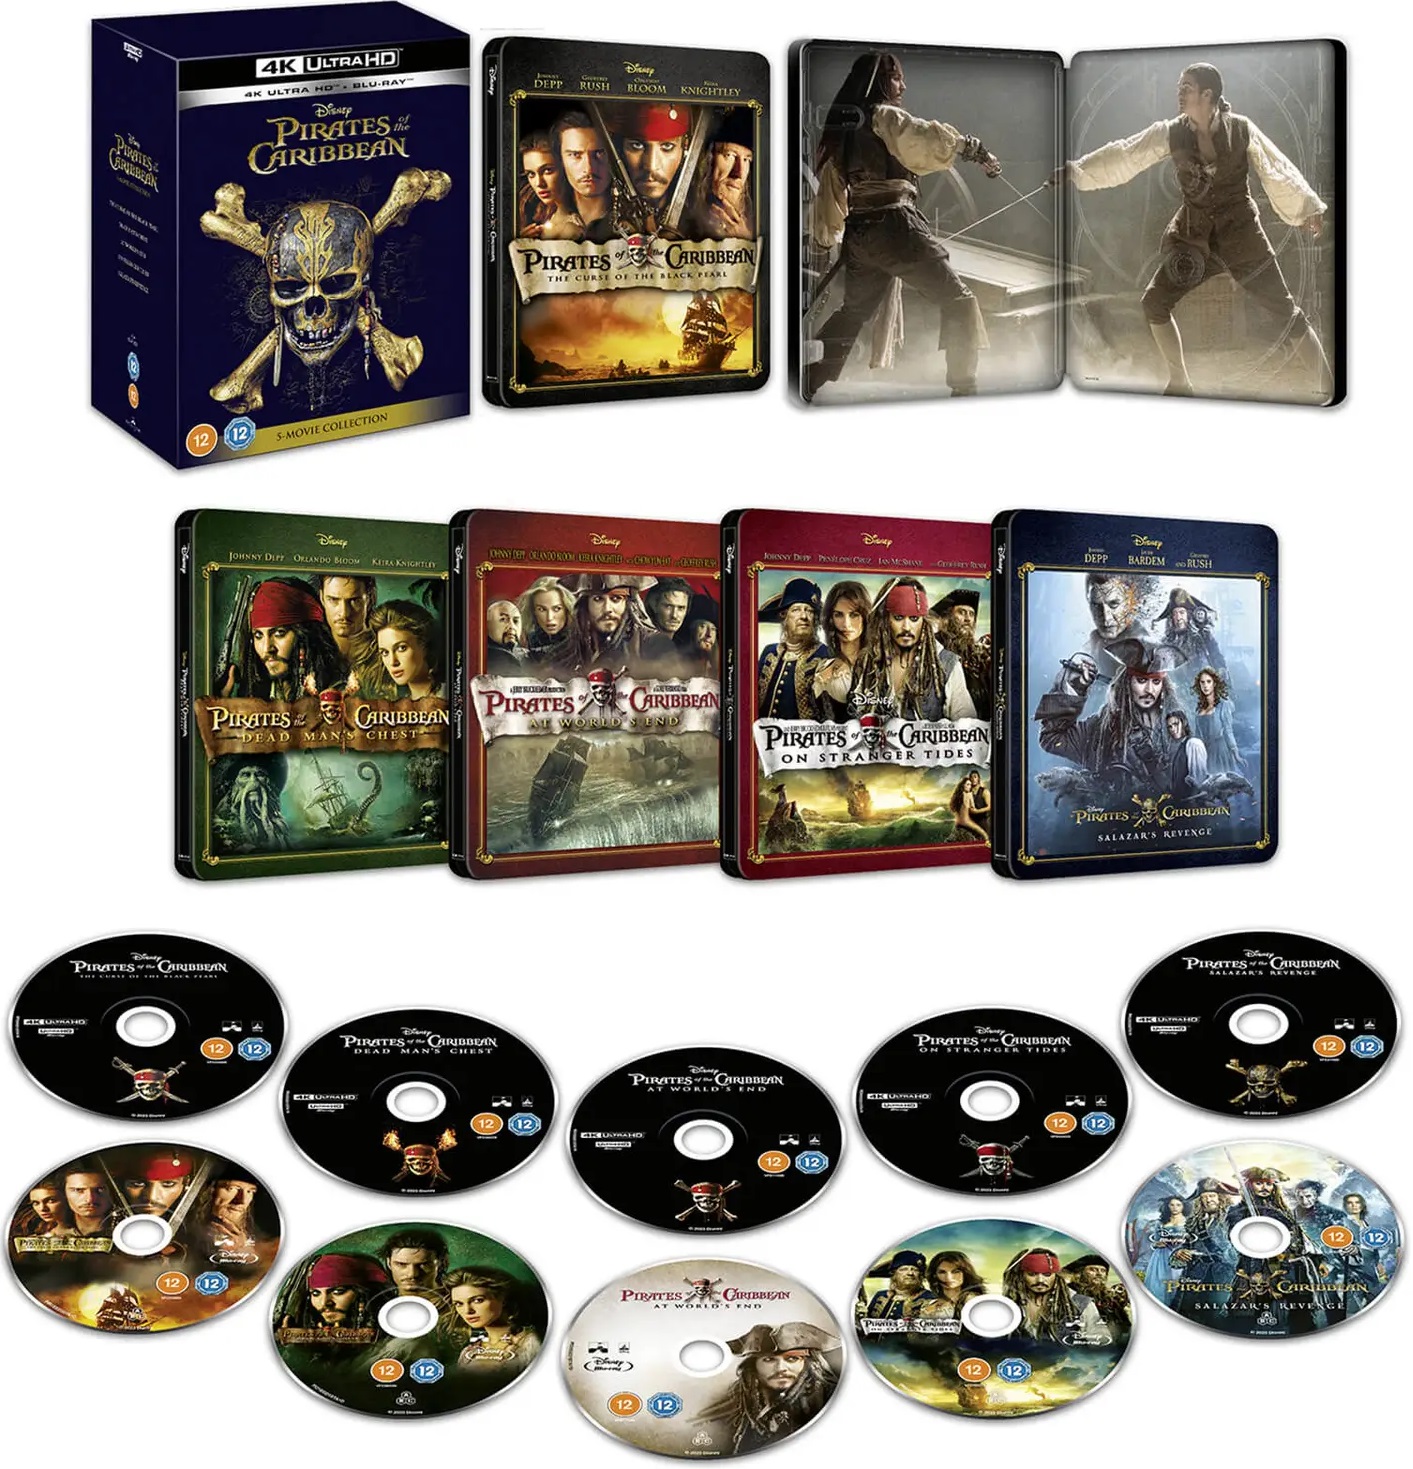 Pirates of the Caribbean: 5-Movie Collection [12] 4K UHD Box Set